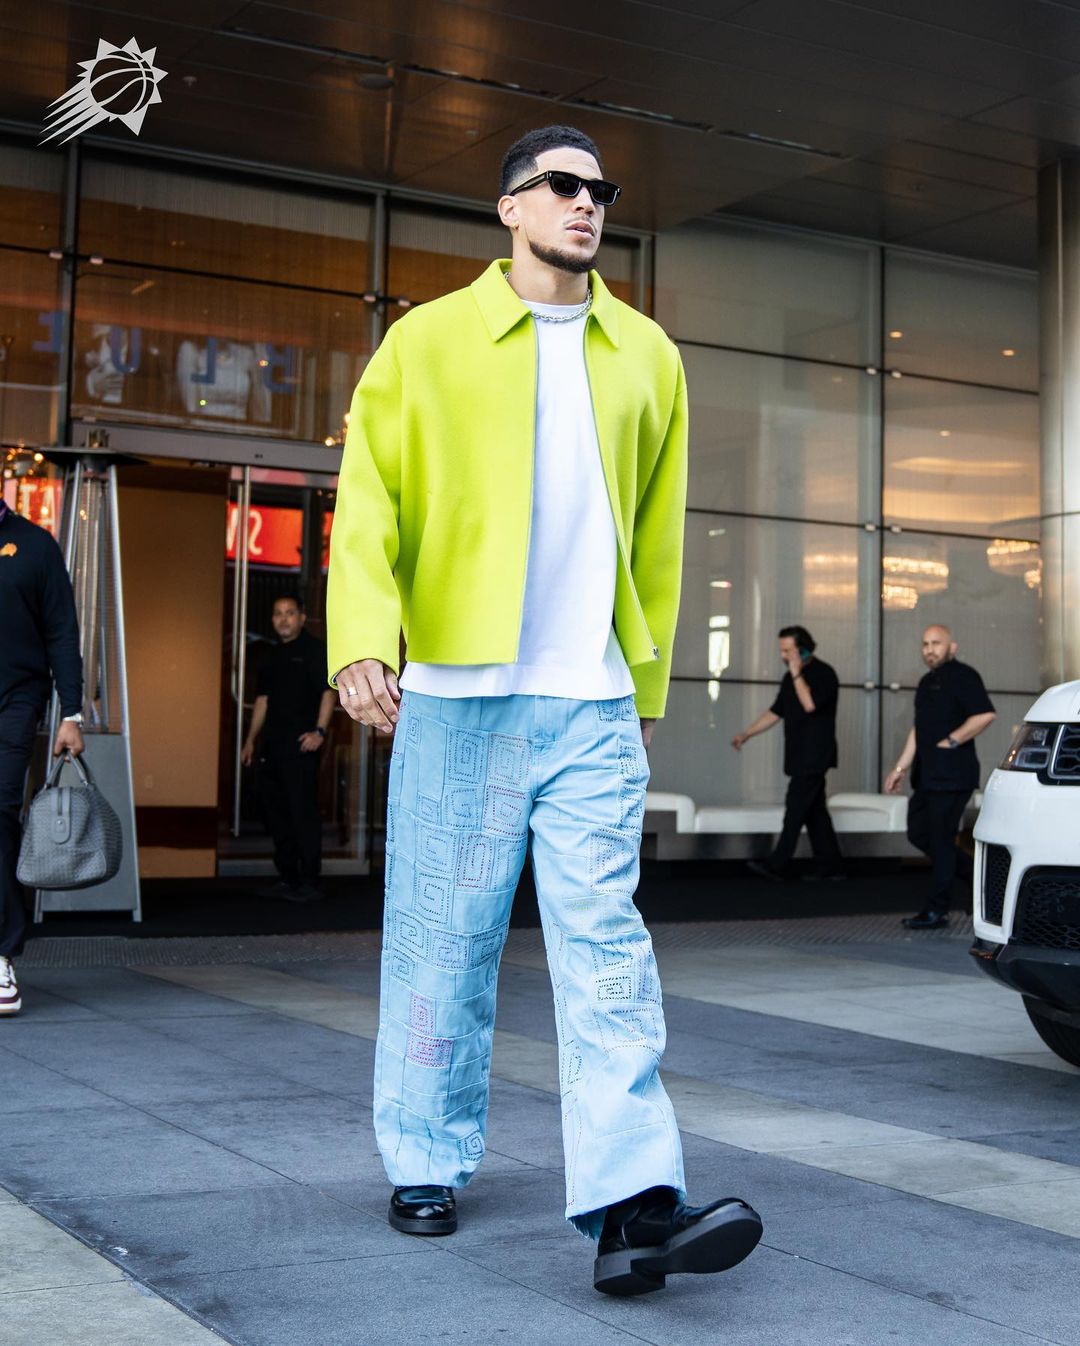 Devin Booker shows off a fashionable style choice with his bright colored outfit. 